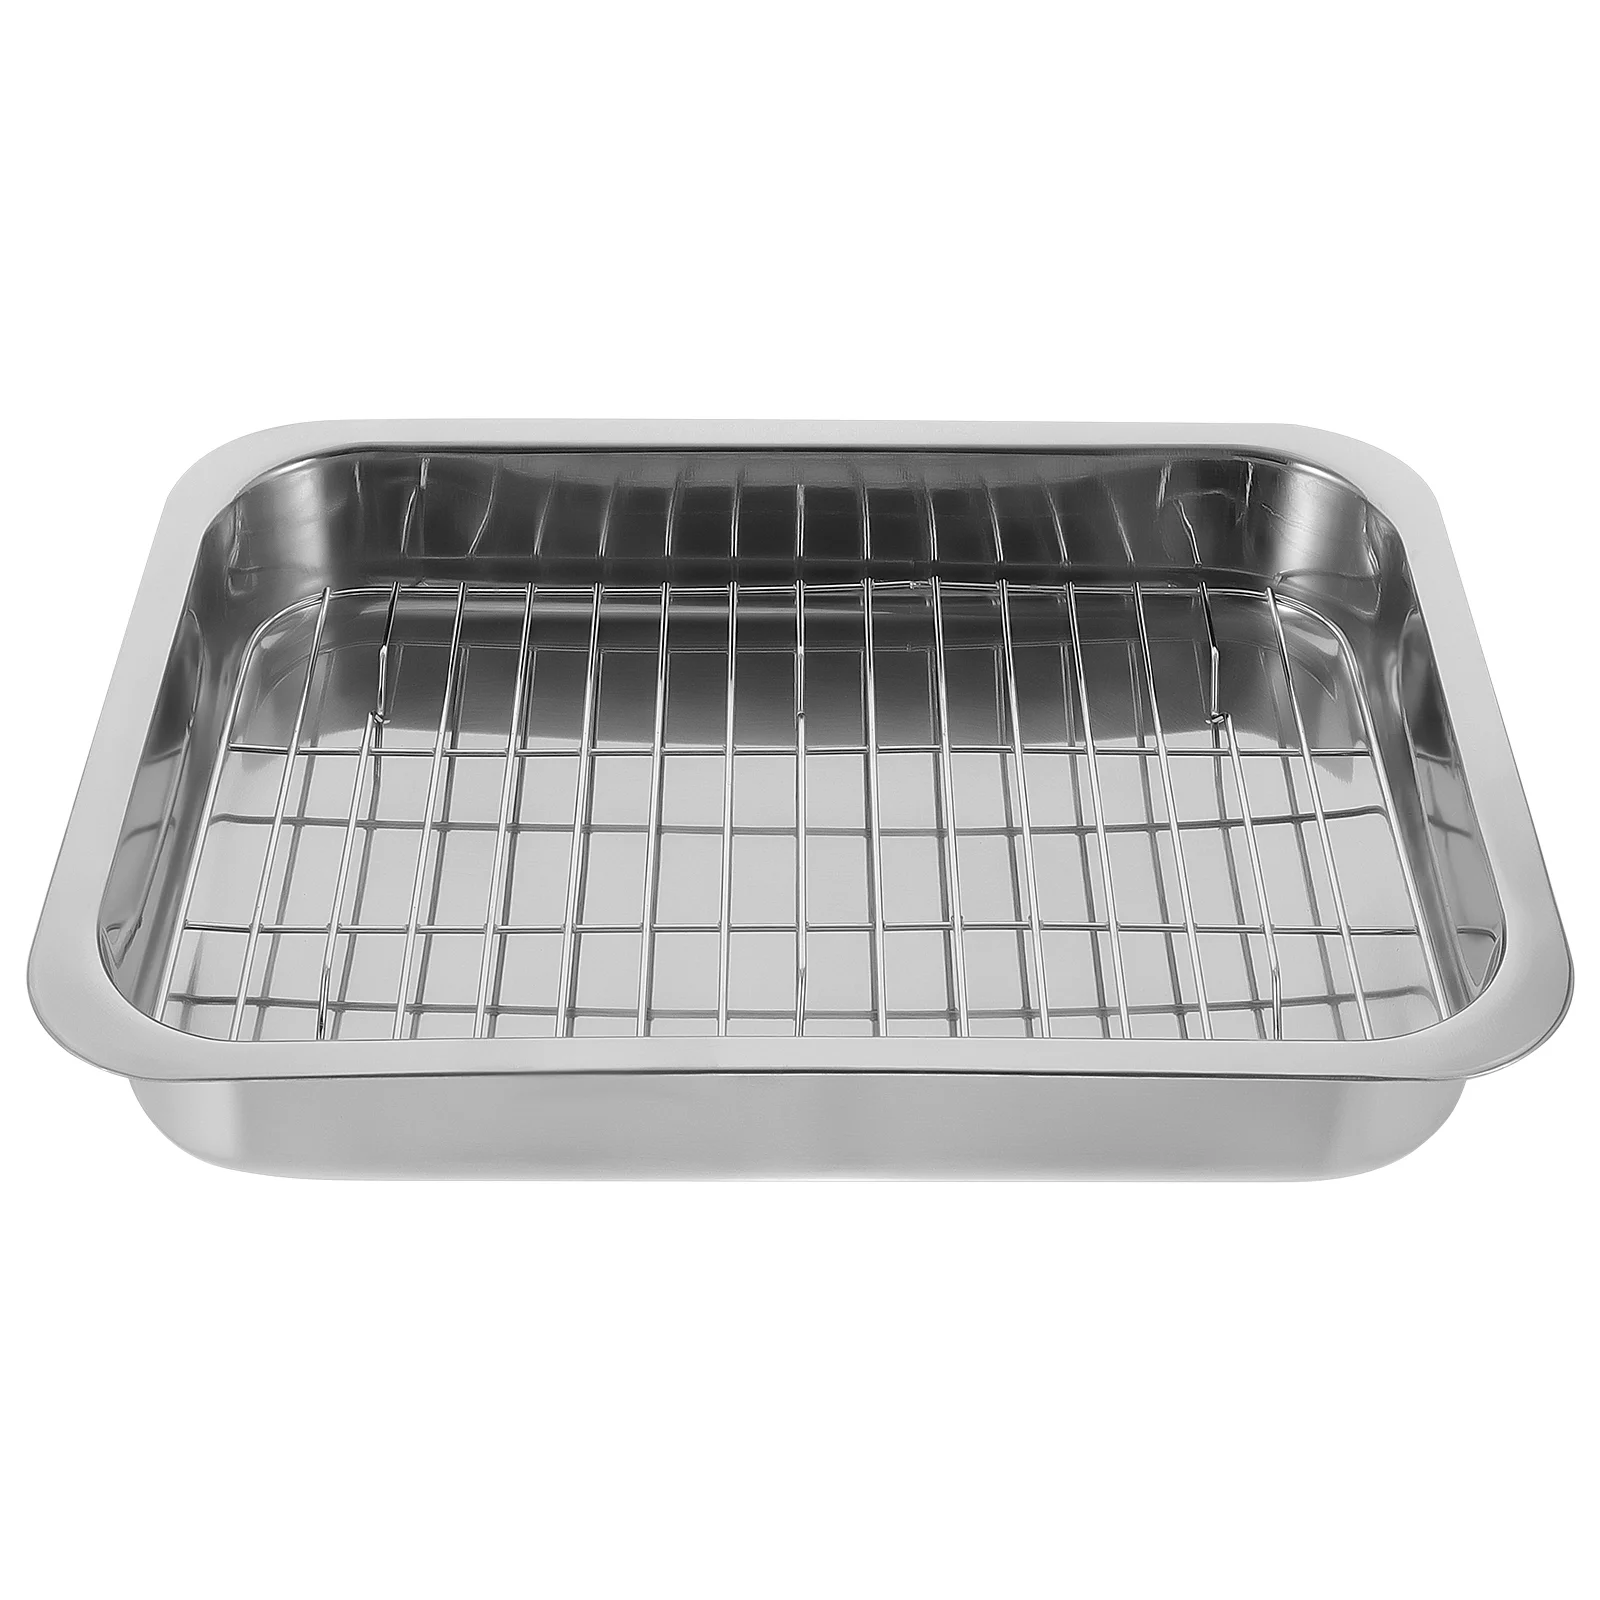 

Stainless Steel Bakeware Oven Tray Rack Bbq Grill Griddle Plate Pizza Baking Kit Grille